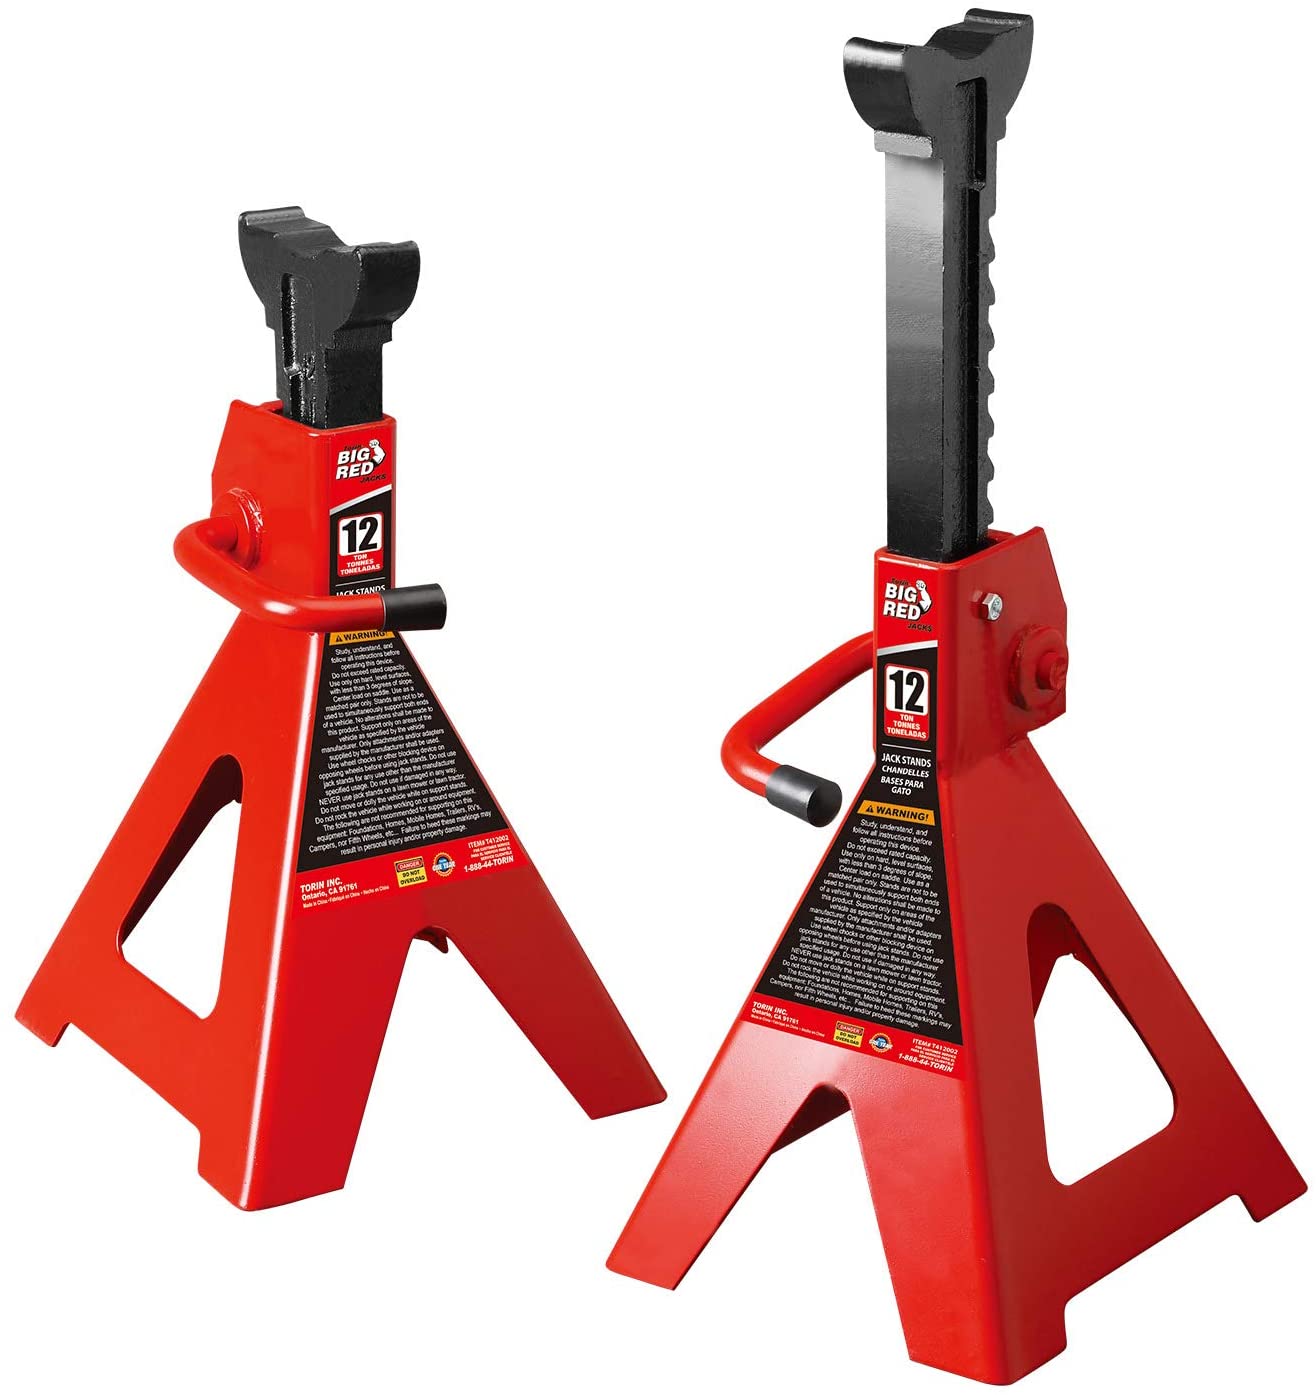 T43202 Torin Steel Jack Stands: 3 Ton (6,000 lb) Capacity, Red, 1 Pair